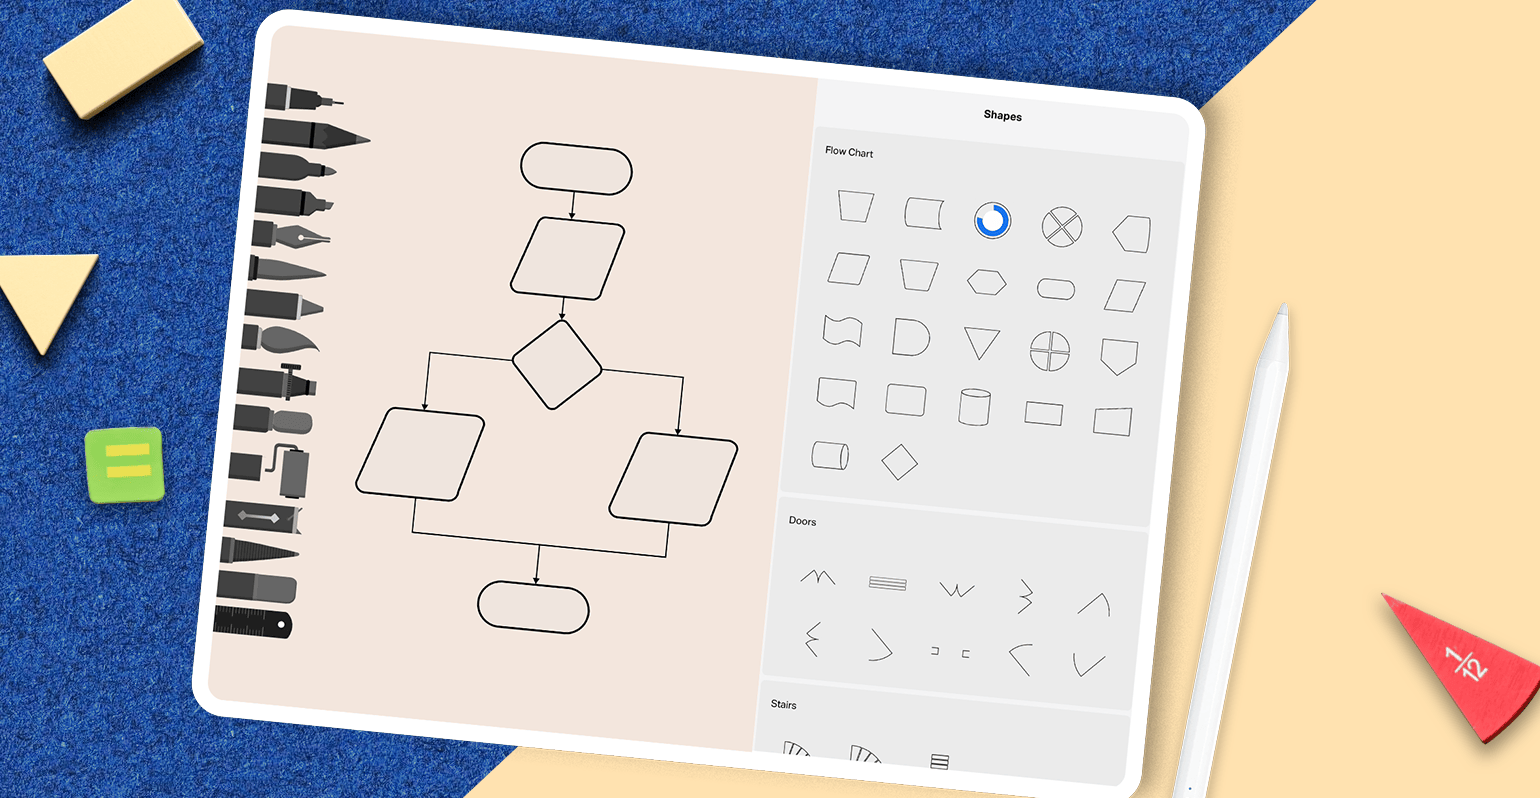 Shapes Library for Brainstorming on Drawing Desk